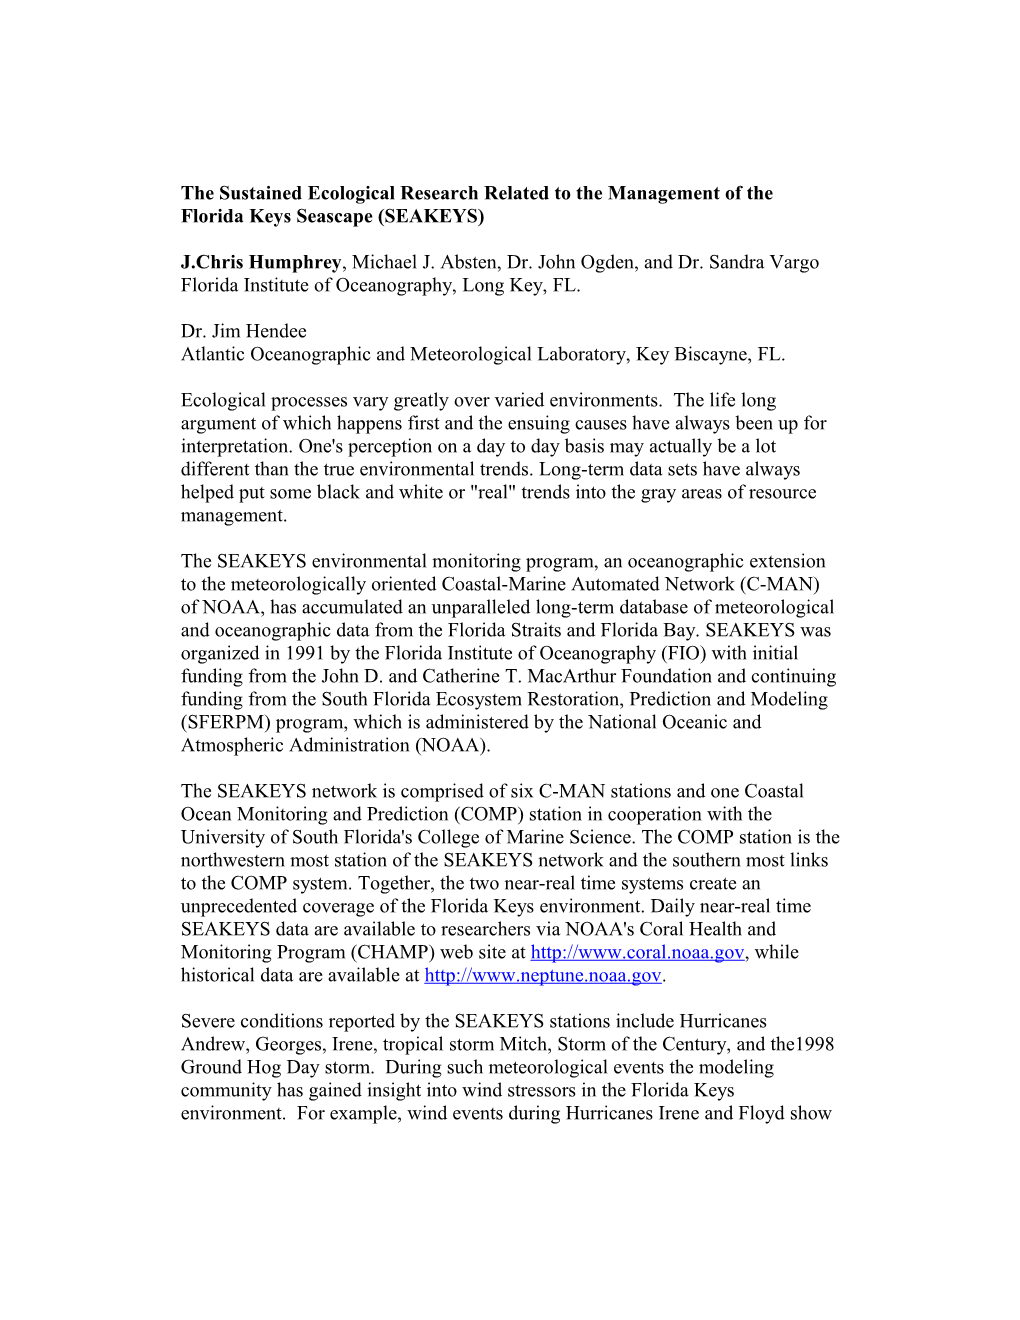 The Sustained Ecological Research Related to the Management of the Florida Keys Seascape